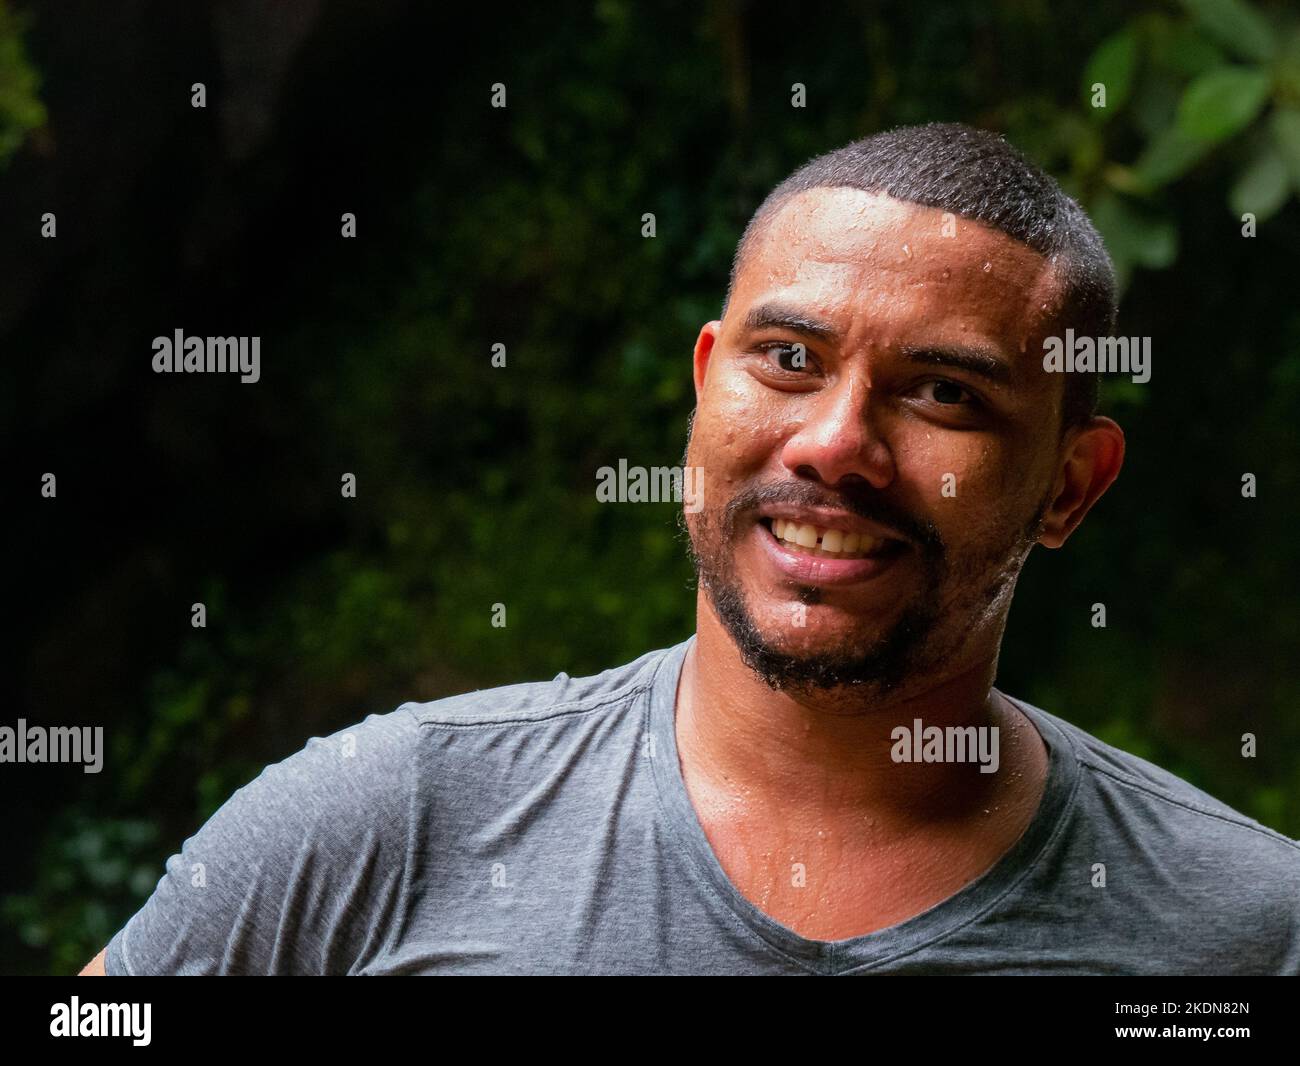 Envigado, Antioquia, Colombia - February 27 2020: Wet Brown Man from the Colombian Coast Smiles at the Camera after Getting out of the Water Stock Photo